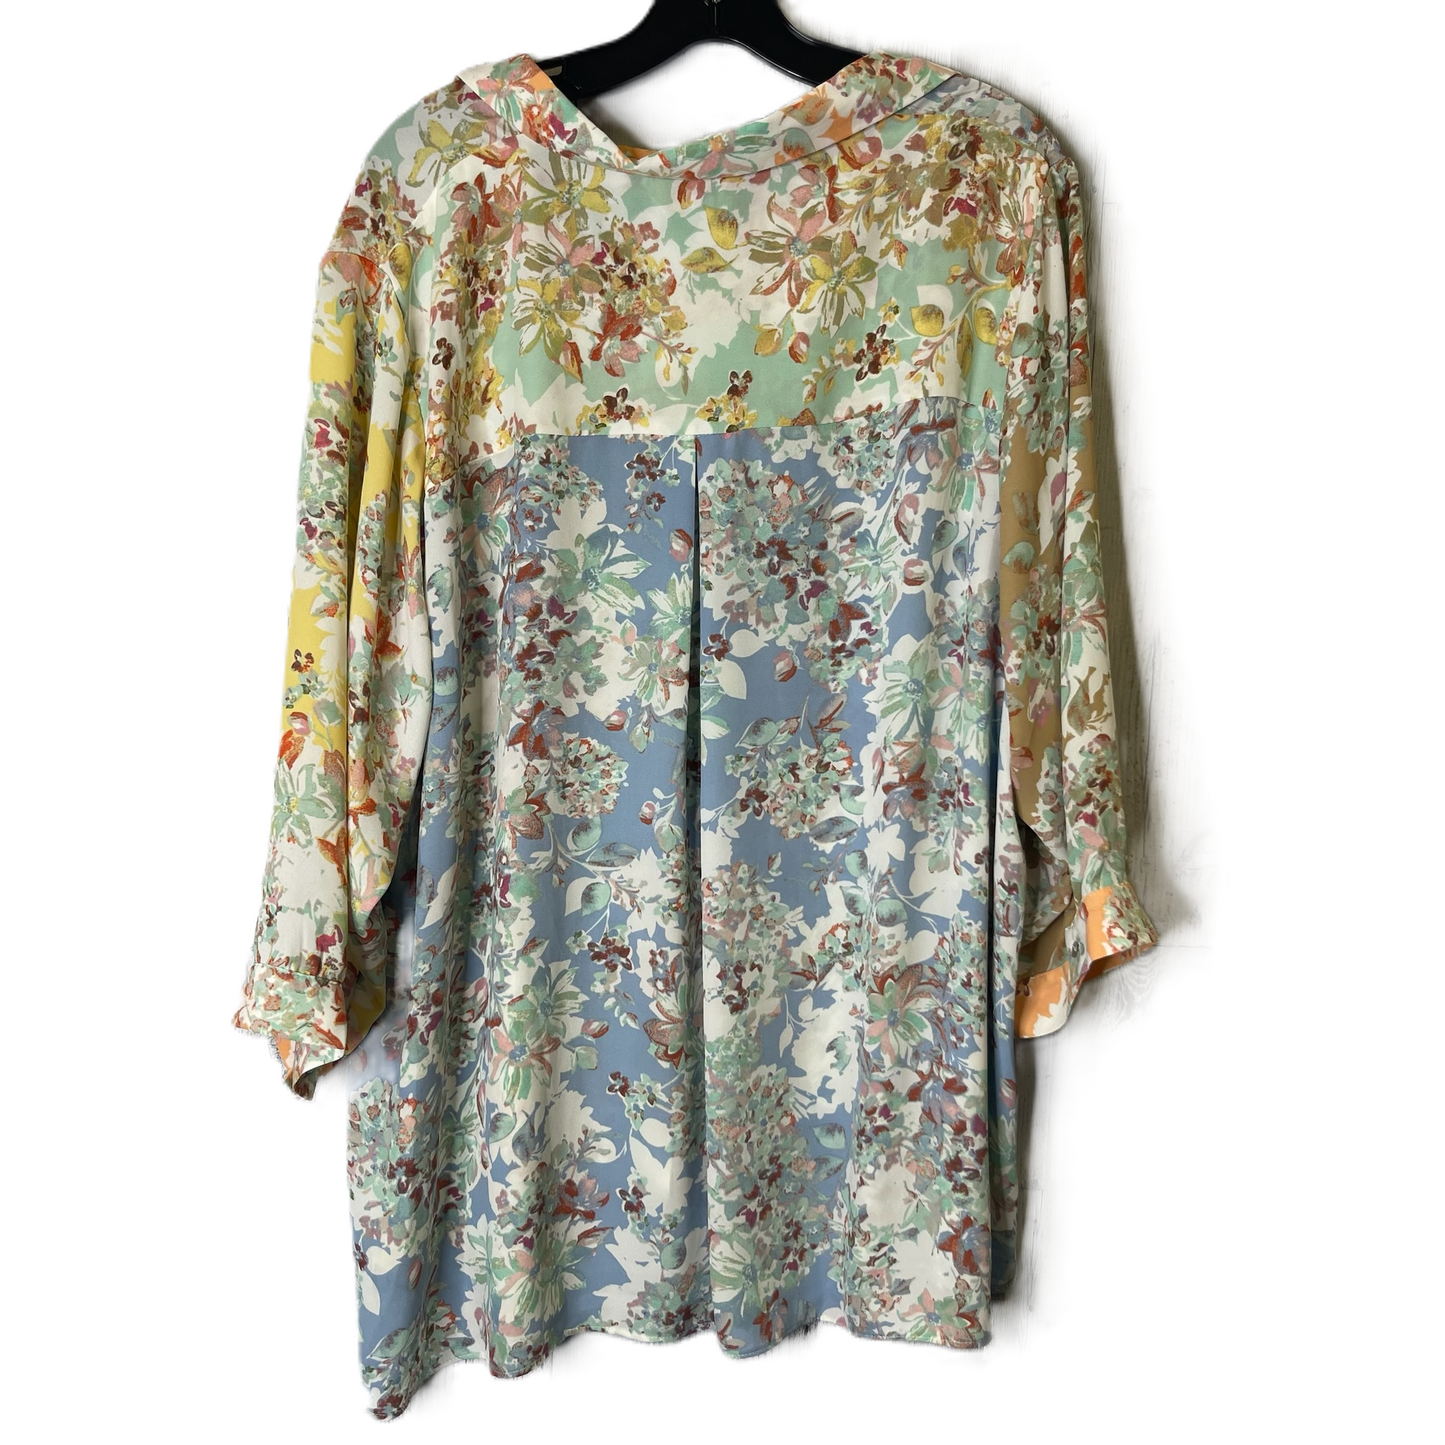 Multi-colored Top Short Sleeve By Rose And Olive, Size: 2x